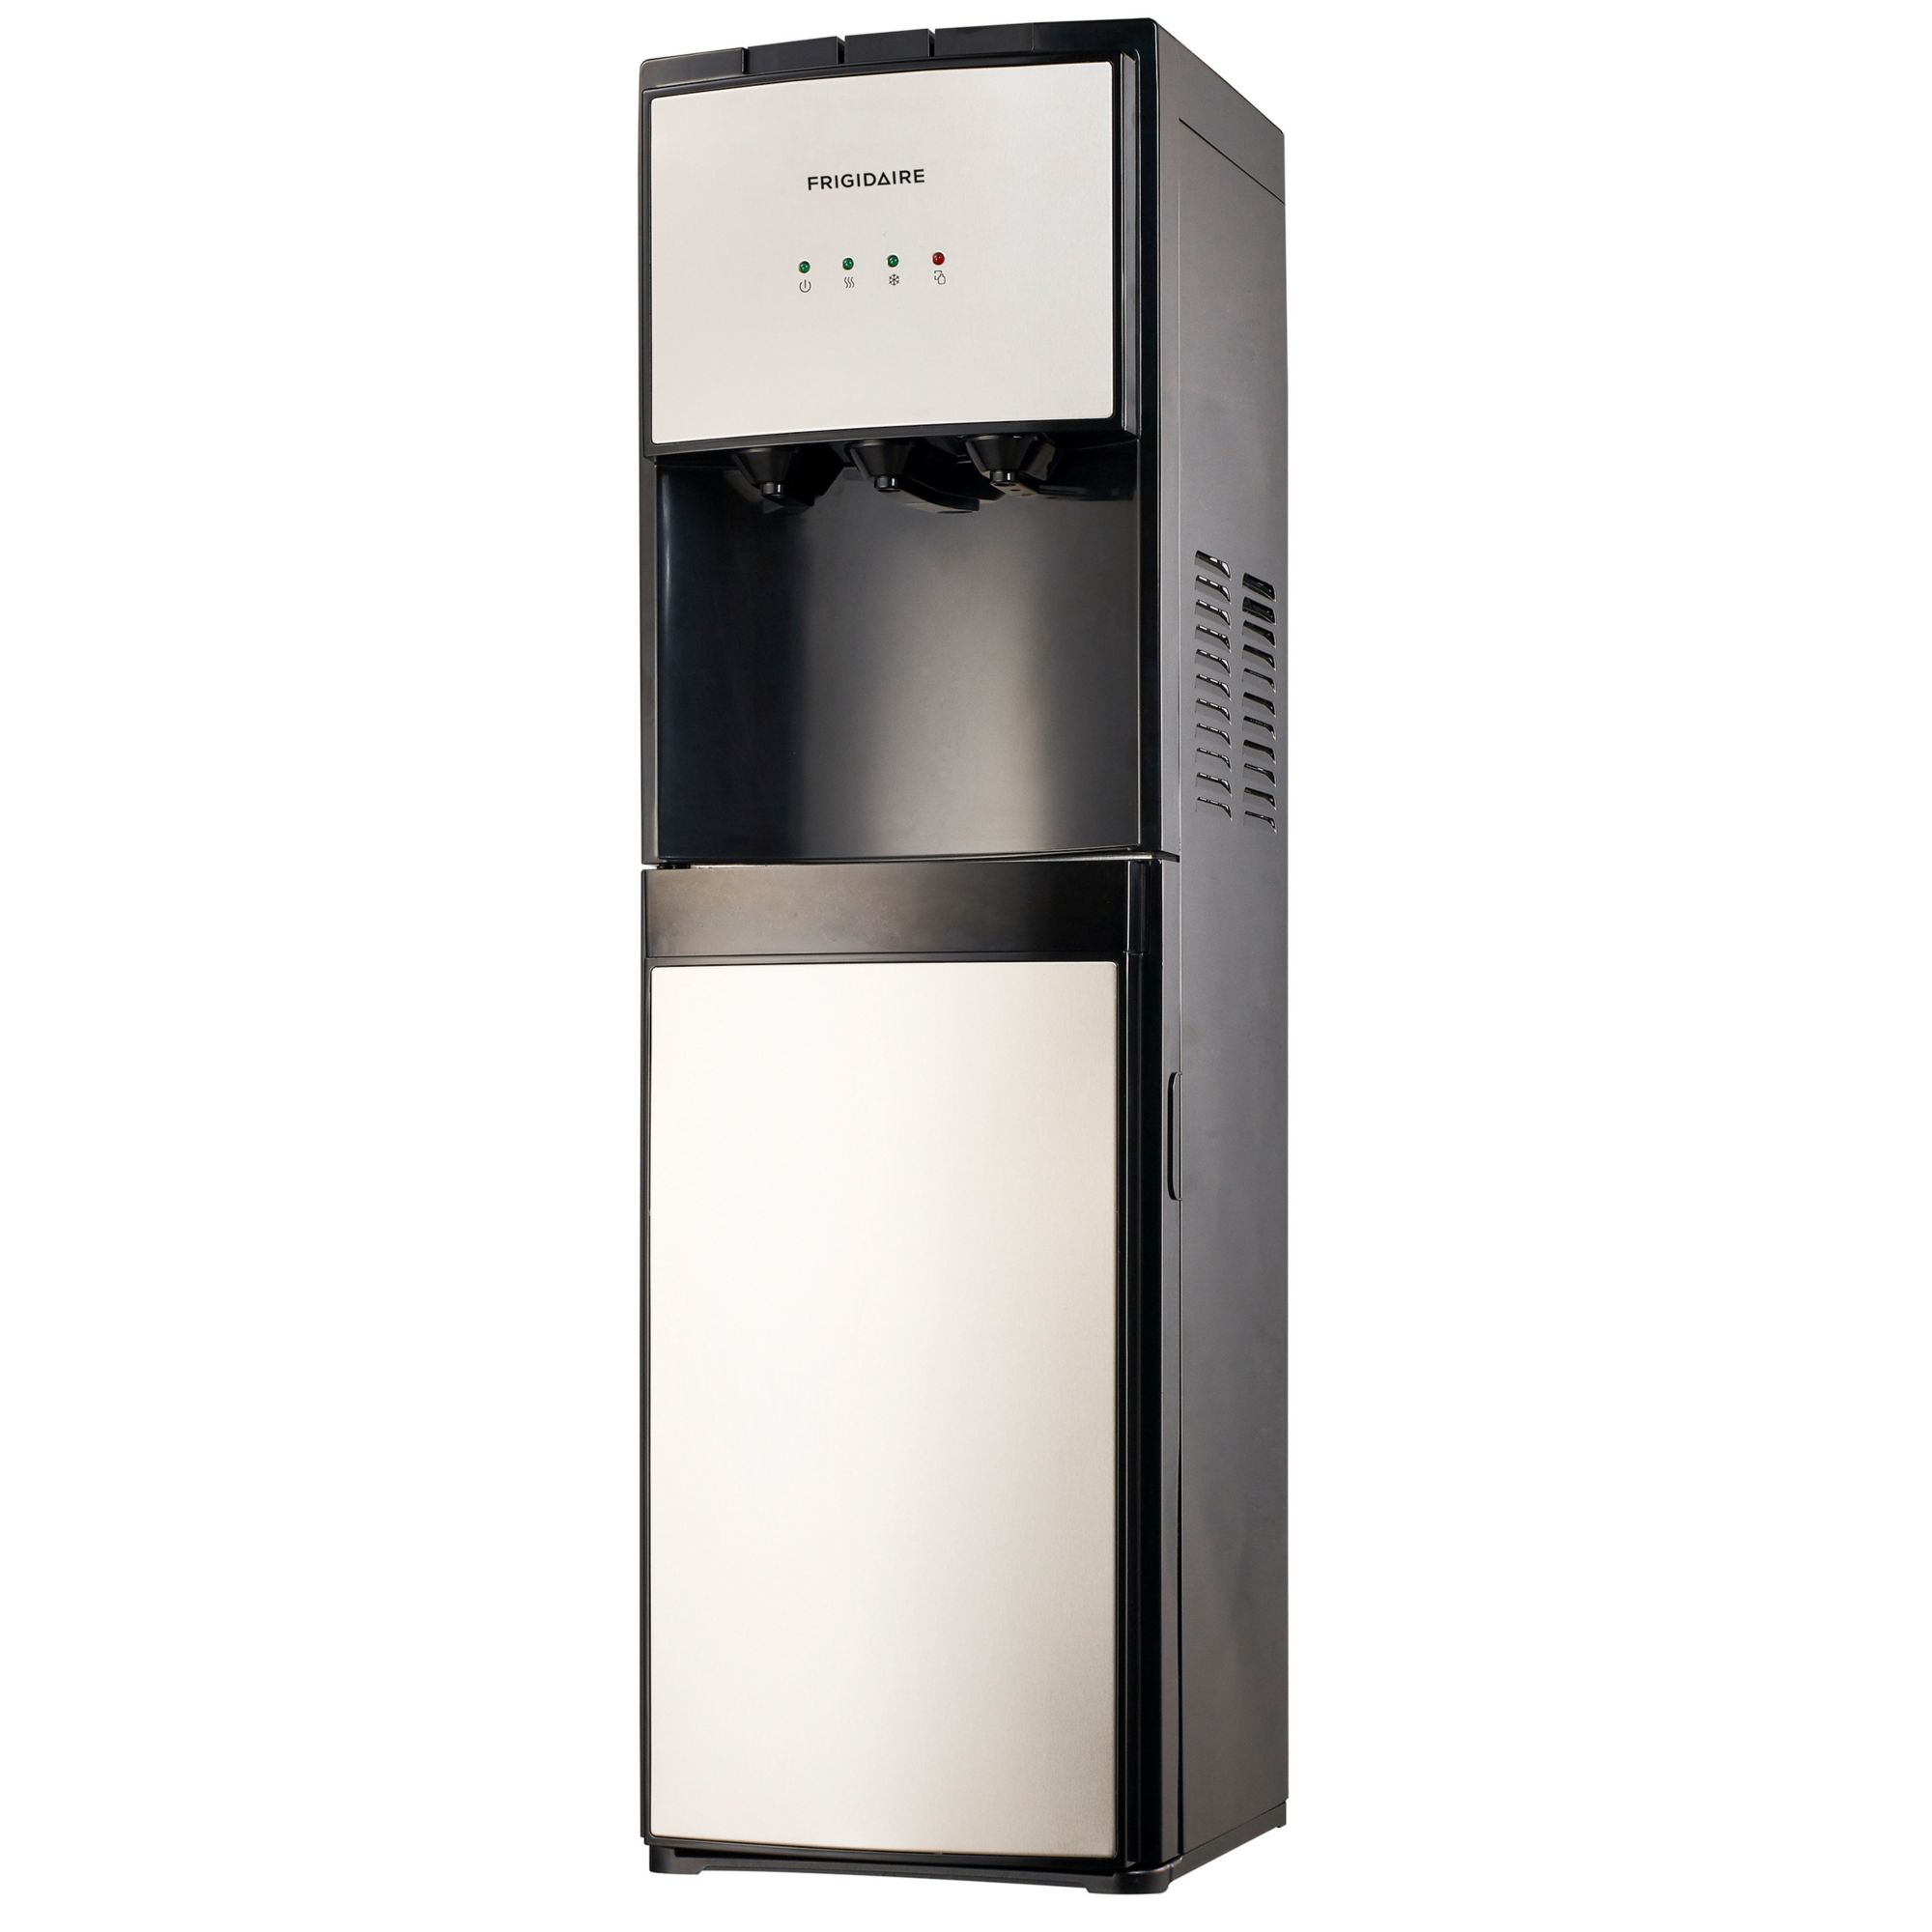 Frigidaire 5-Gallon Hot & Cold Water Dispenser, Stainless Steel